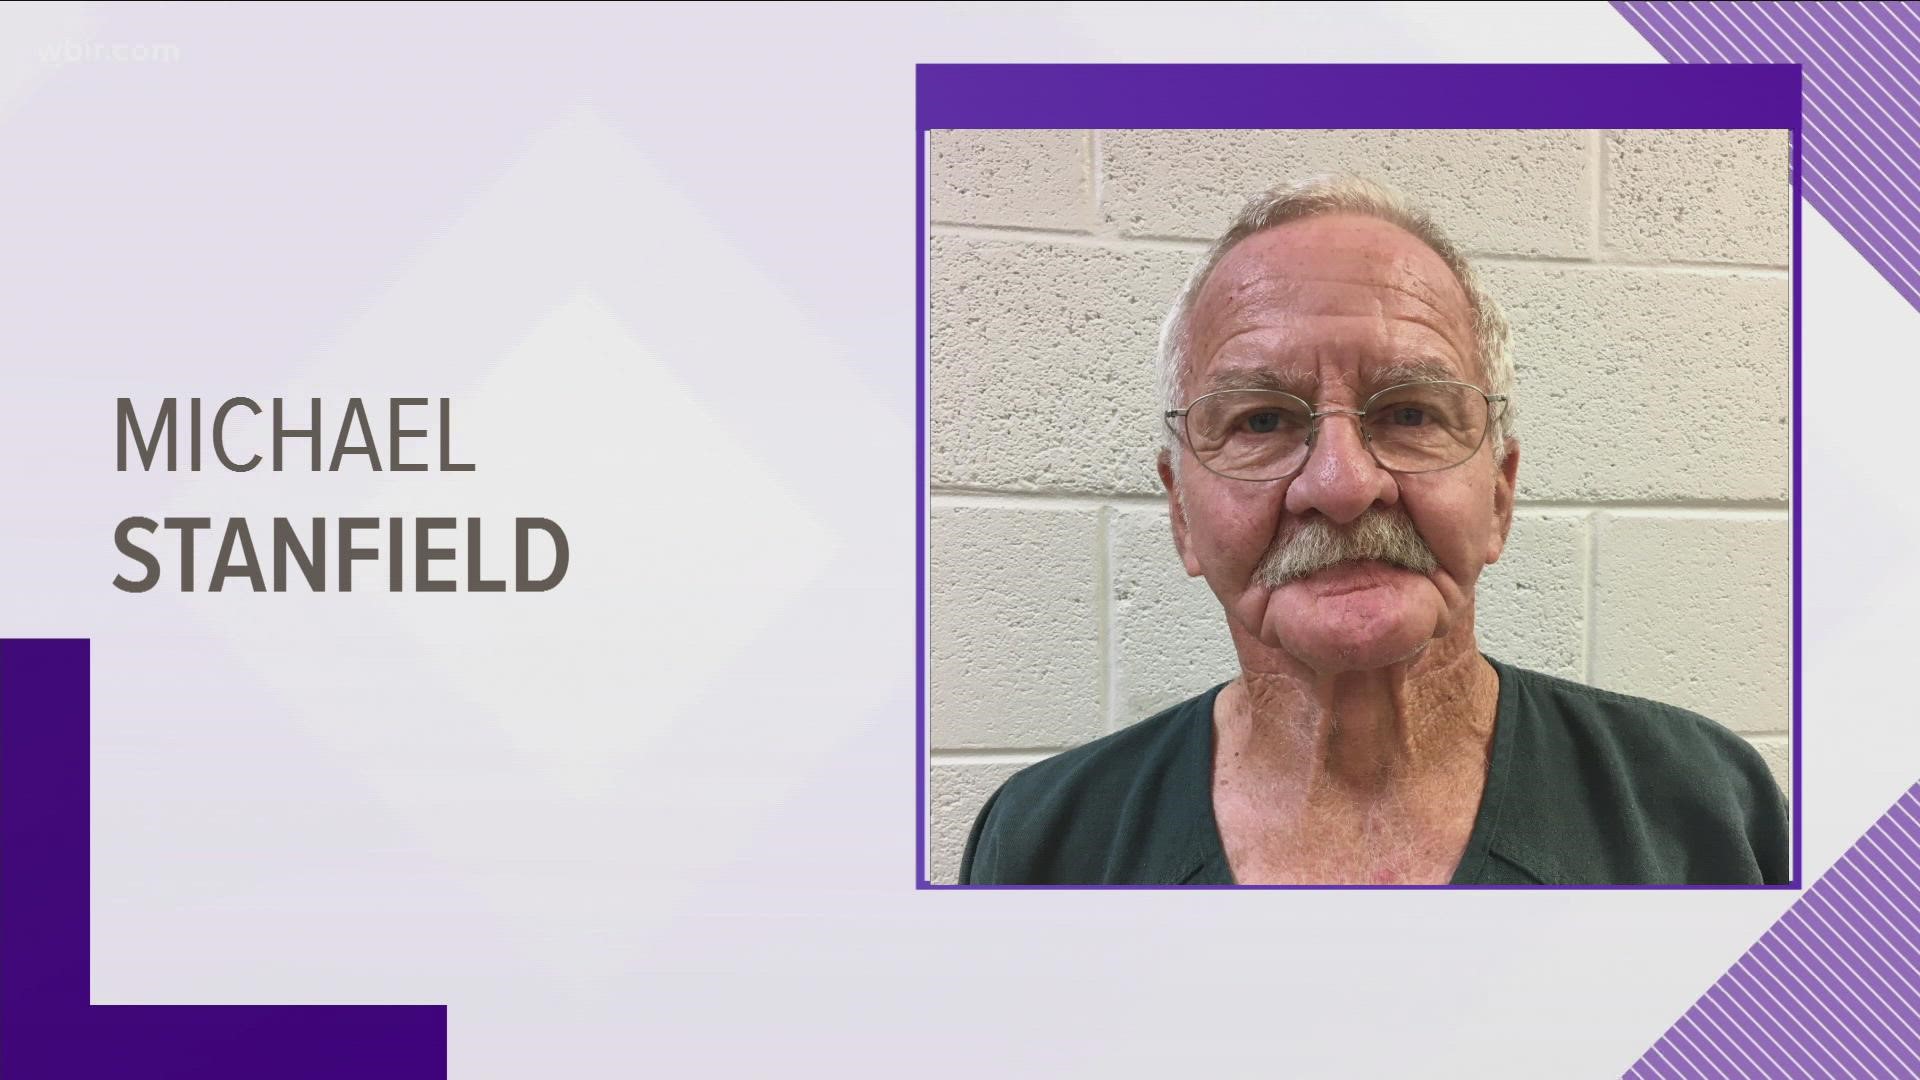 Mayor Michael Stanfield faces charges that he used city services and employees for personal gain.